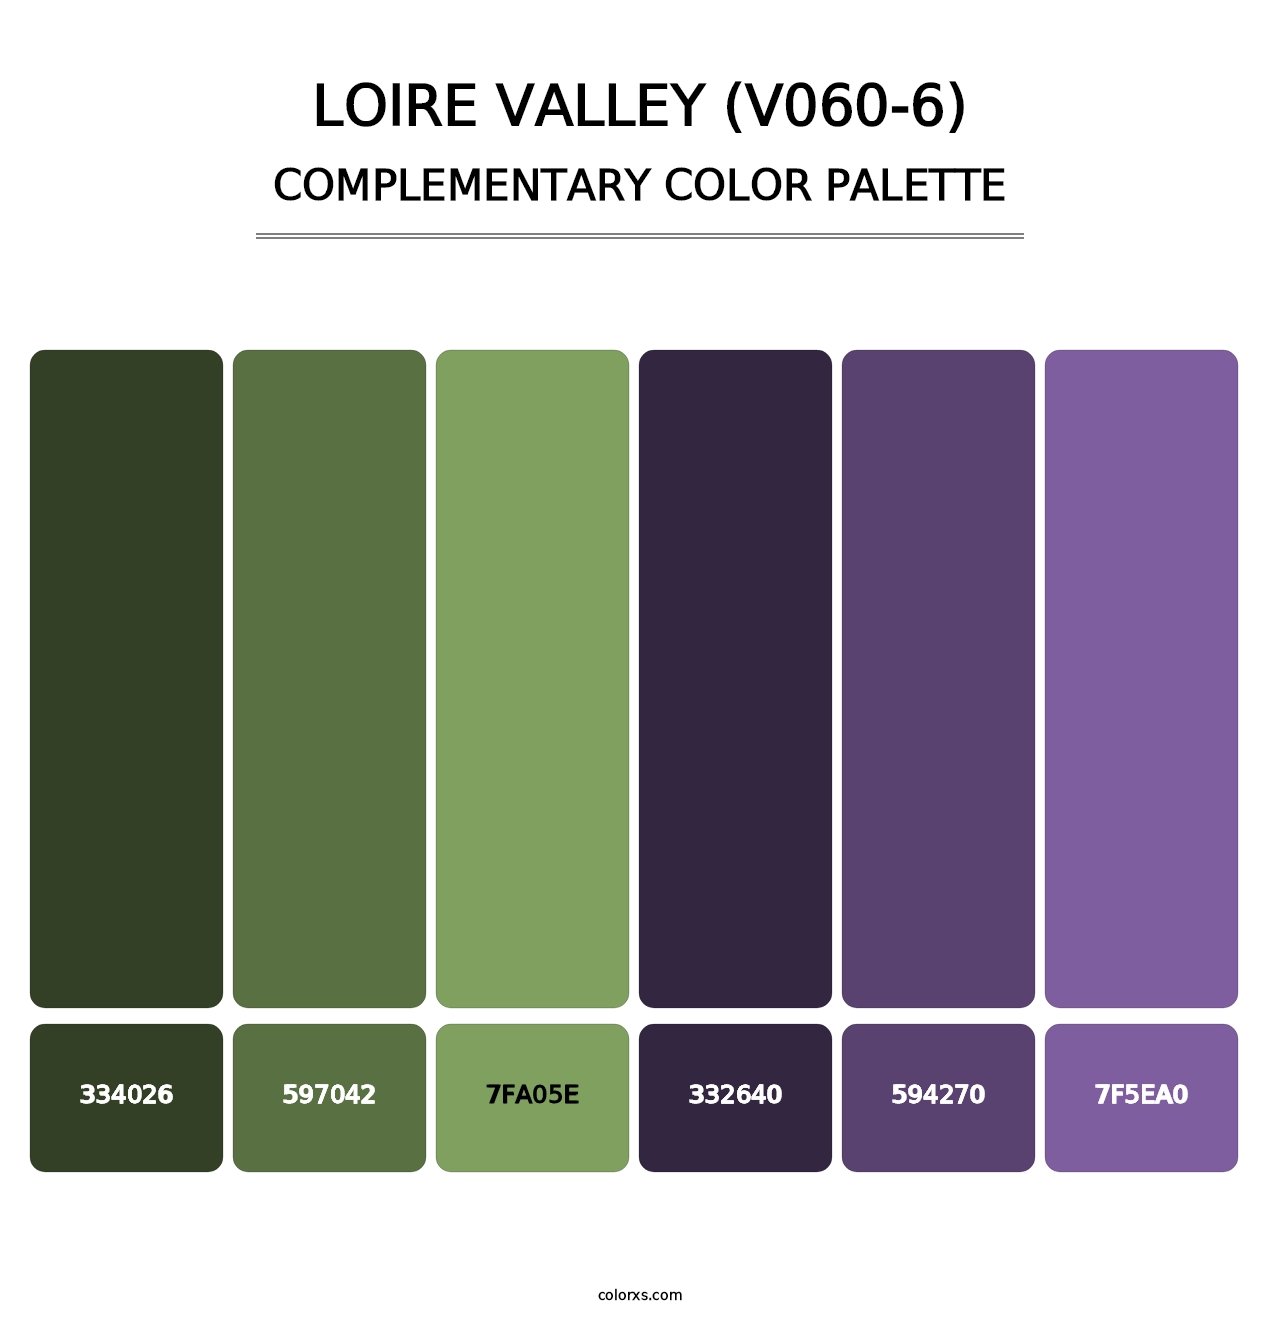 Loire Valley (V060-6) - Complementary Color Palette